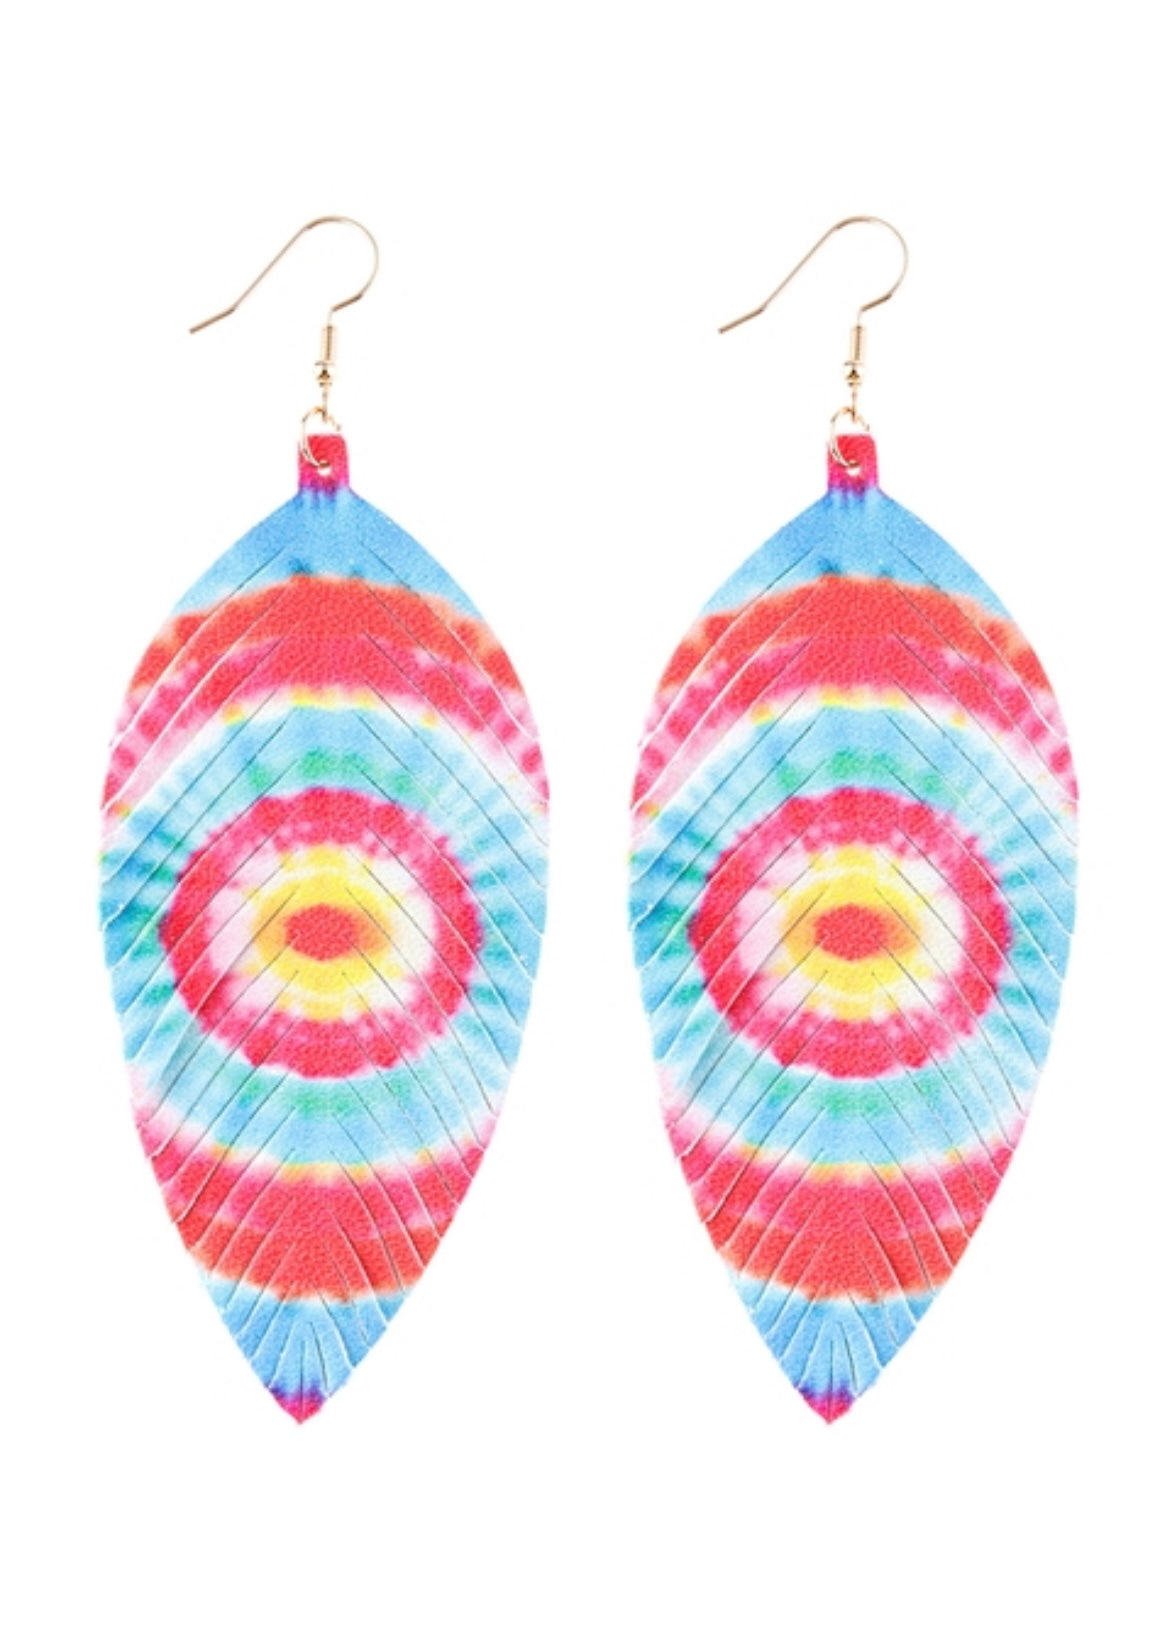 Red white and blue earrings